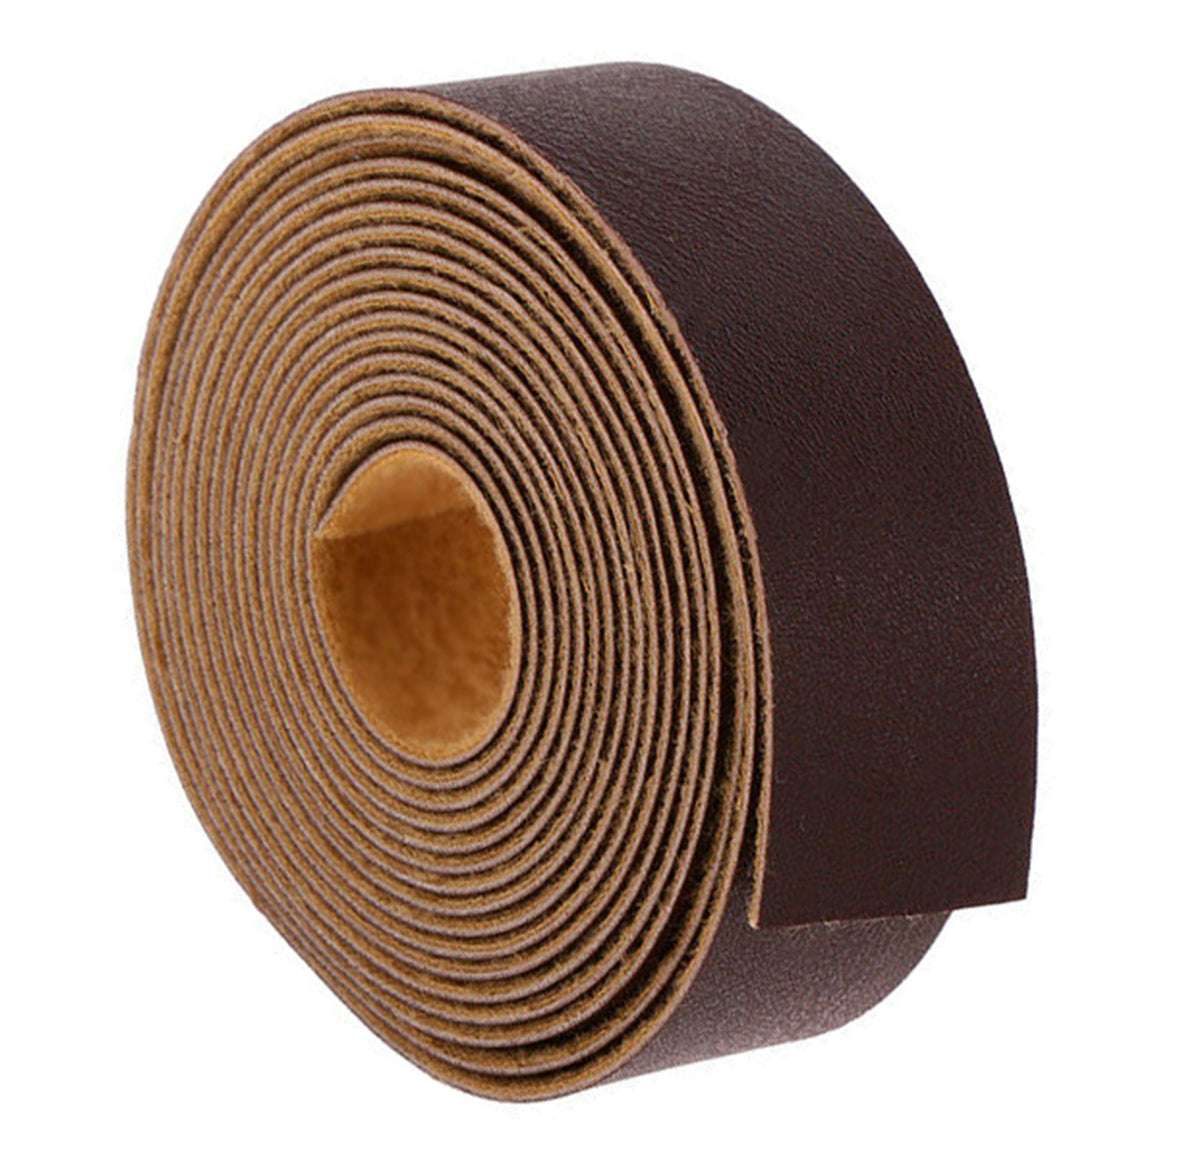 ELW Belt Blanks Strips/Straps 8/9 oz. (3.2-3.6mm) Thickness Size 1-1/2x50  Full Grain Import Natural Cowhide Vegetable Tanned Leather for Tooling